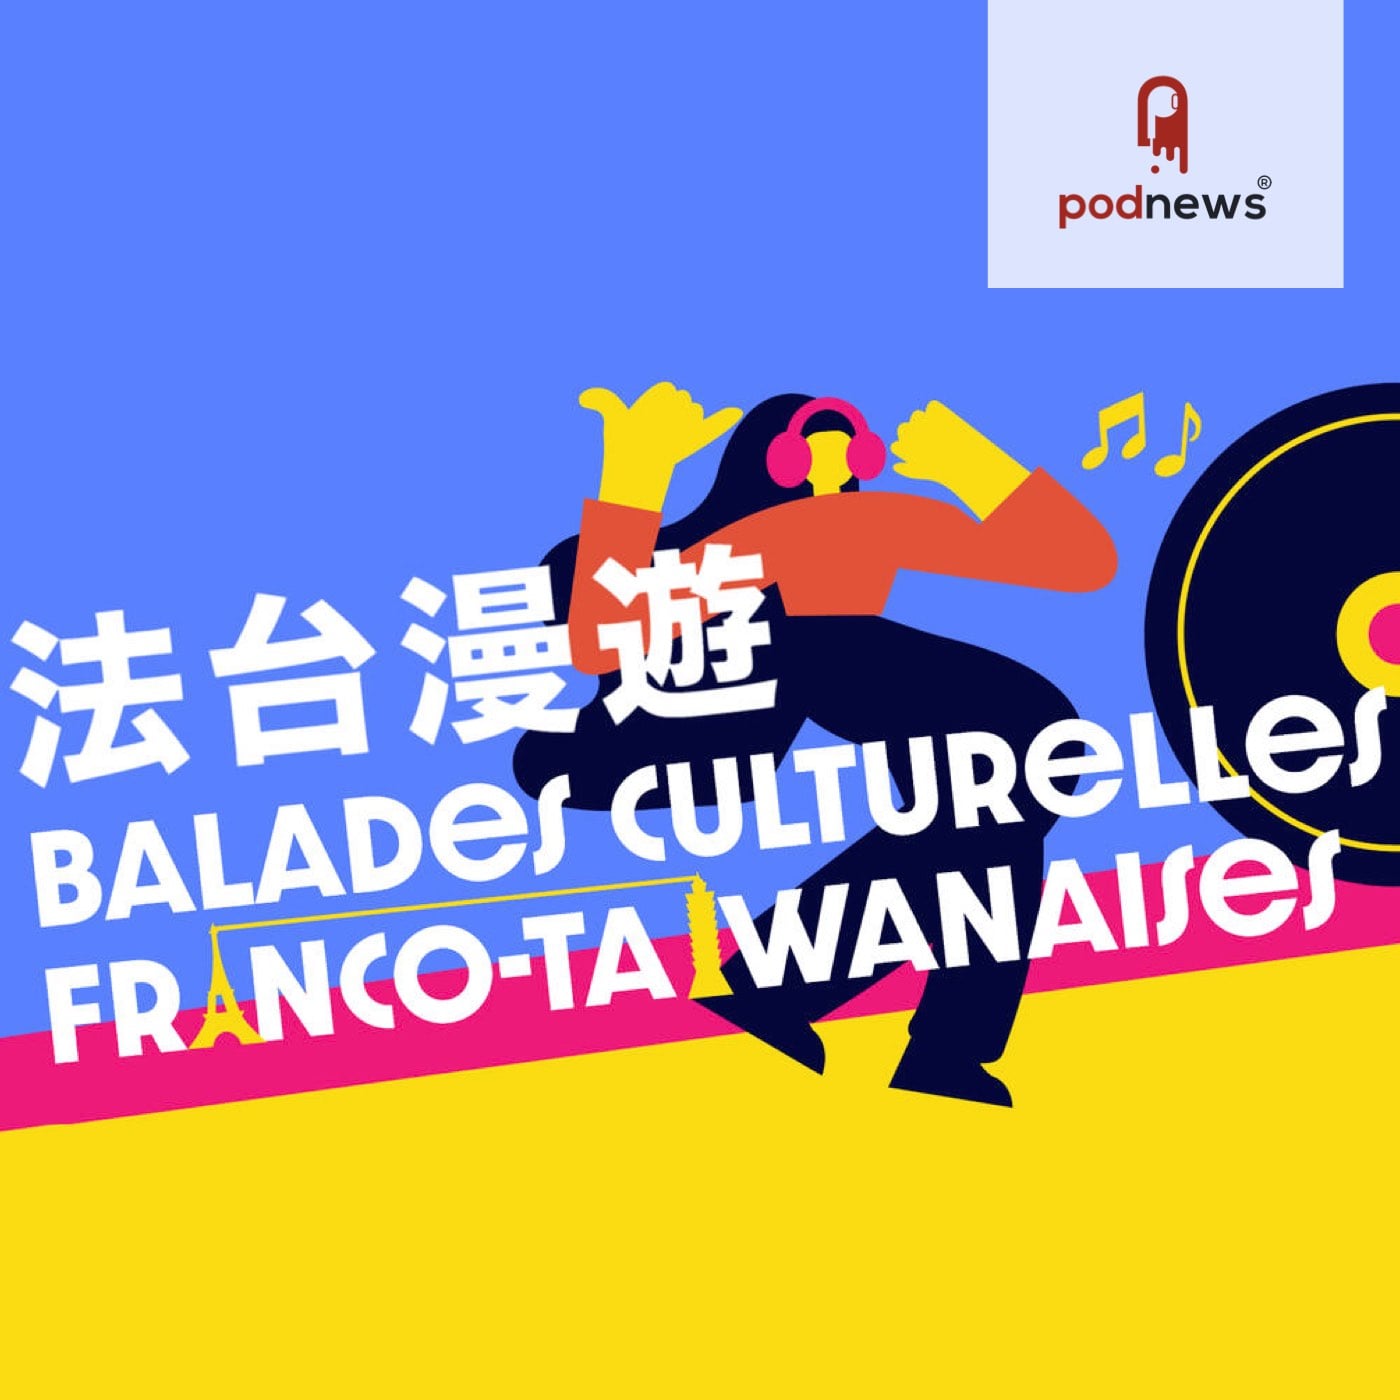 A multilingual podcast in French and Mandarin